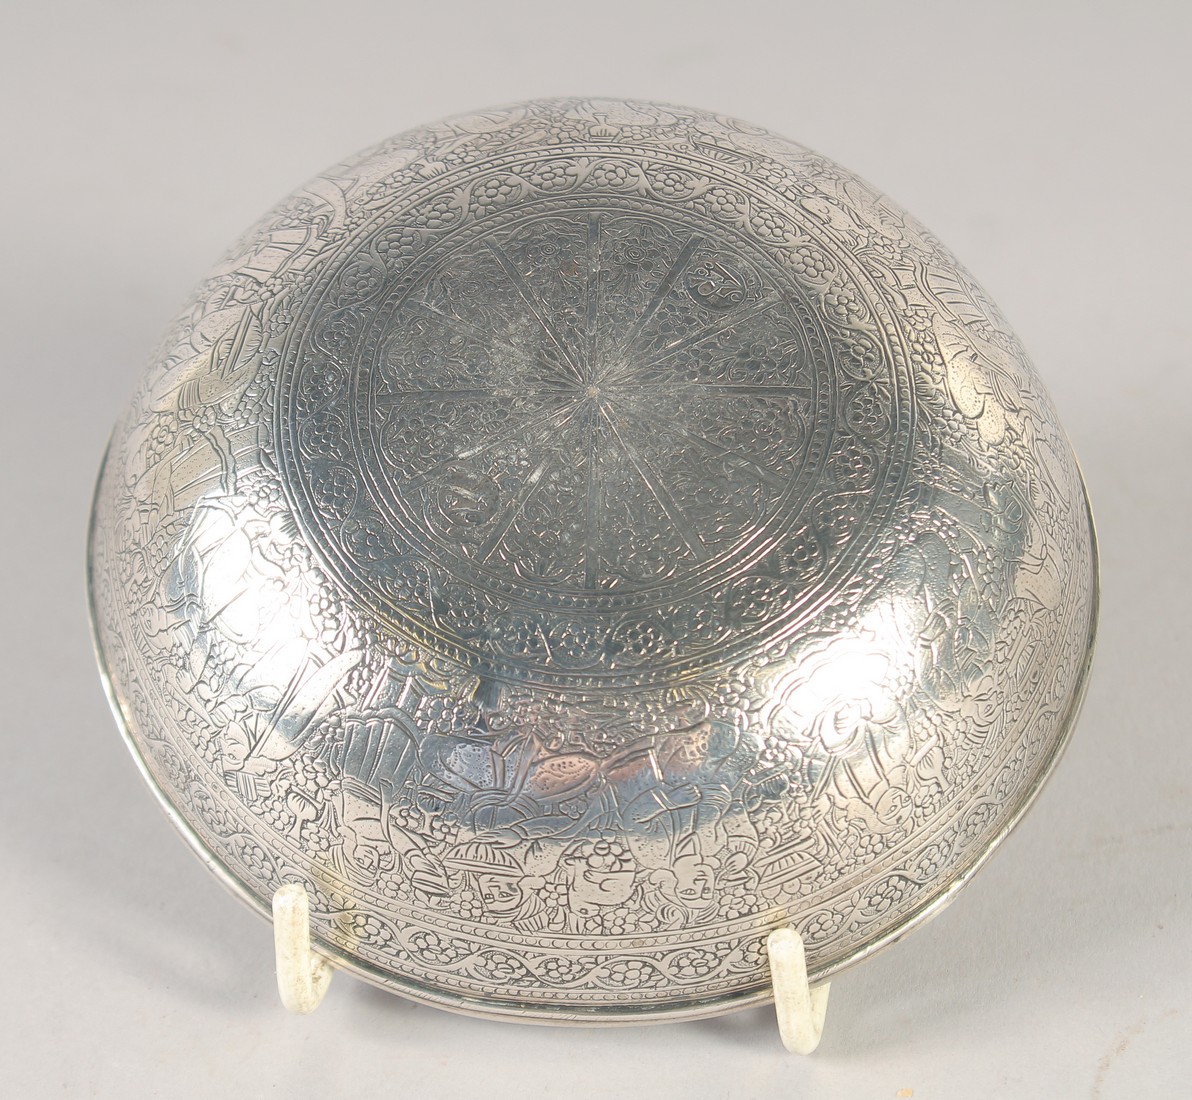 A PERSIAN FINELY ENGRAVED SILVER BOWL, with a band of figures and foliate motifs, weight 80g, 11cm - Image 3 of 3